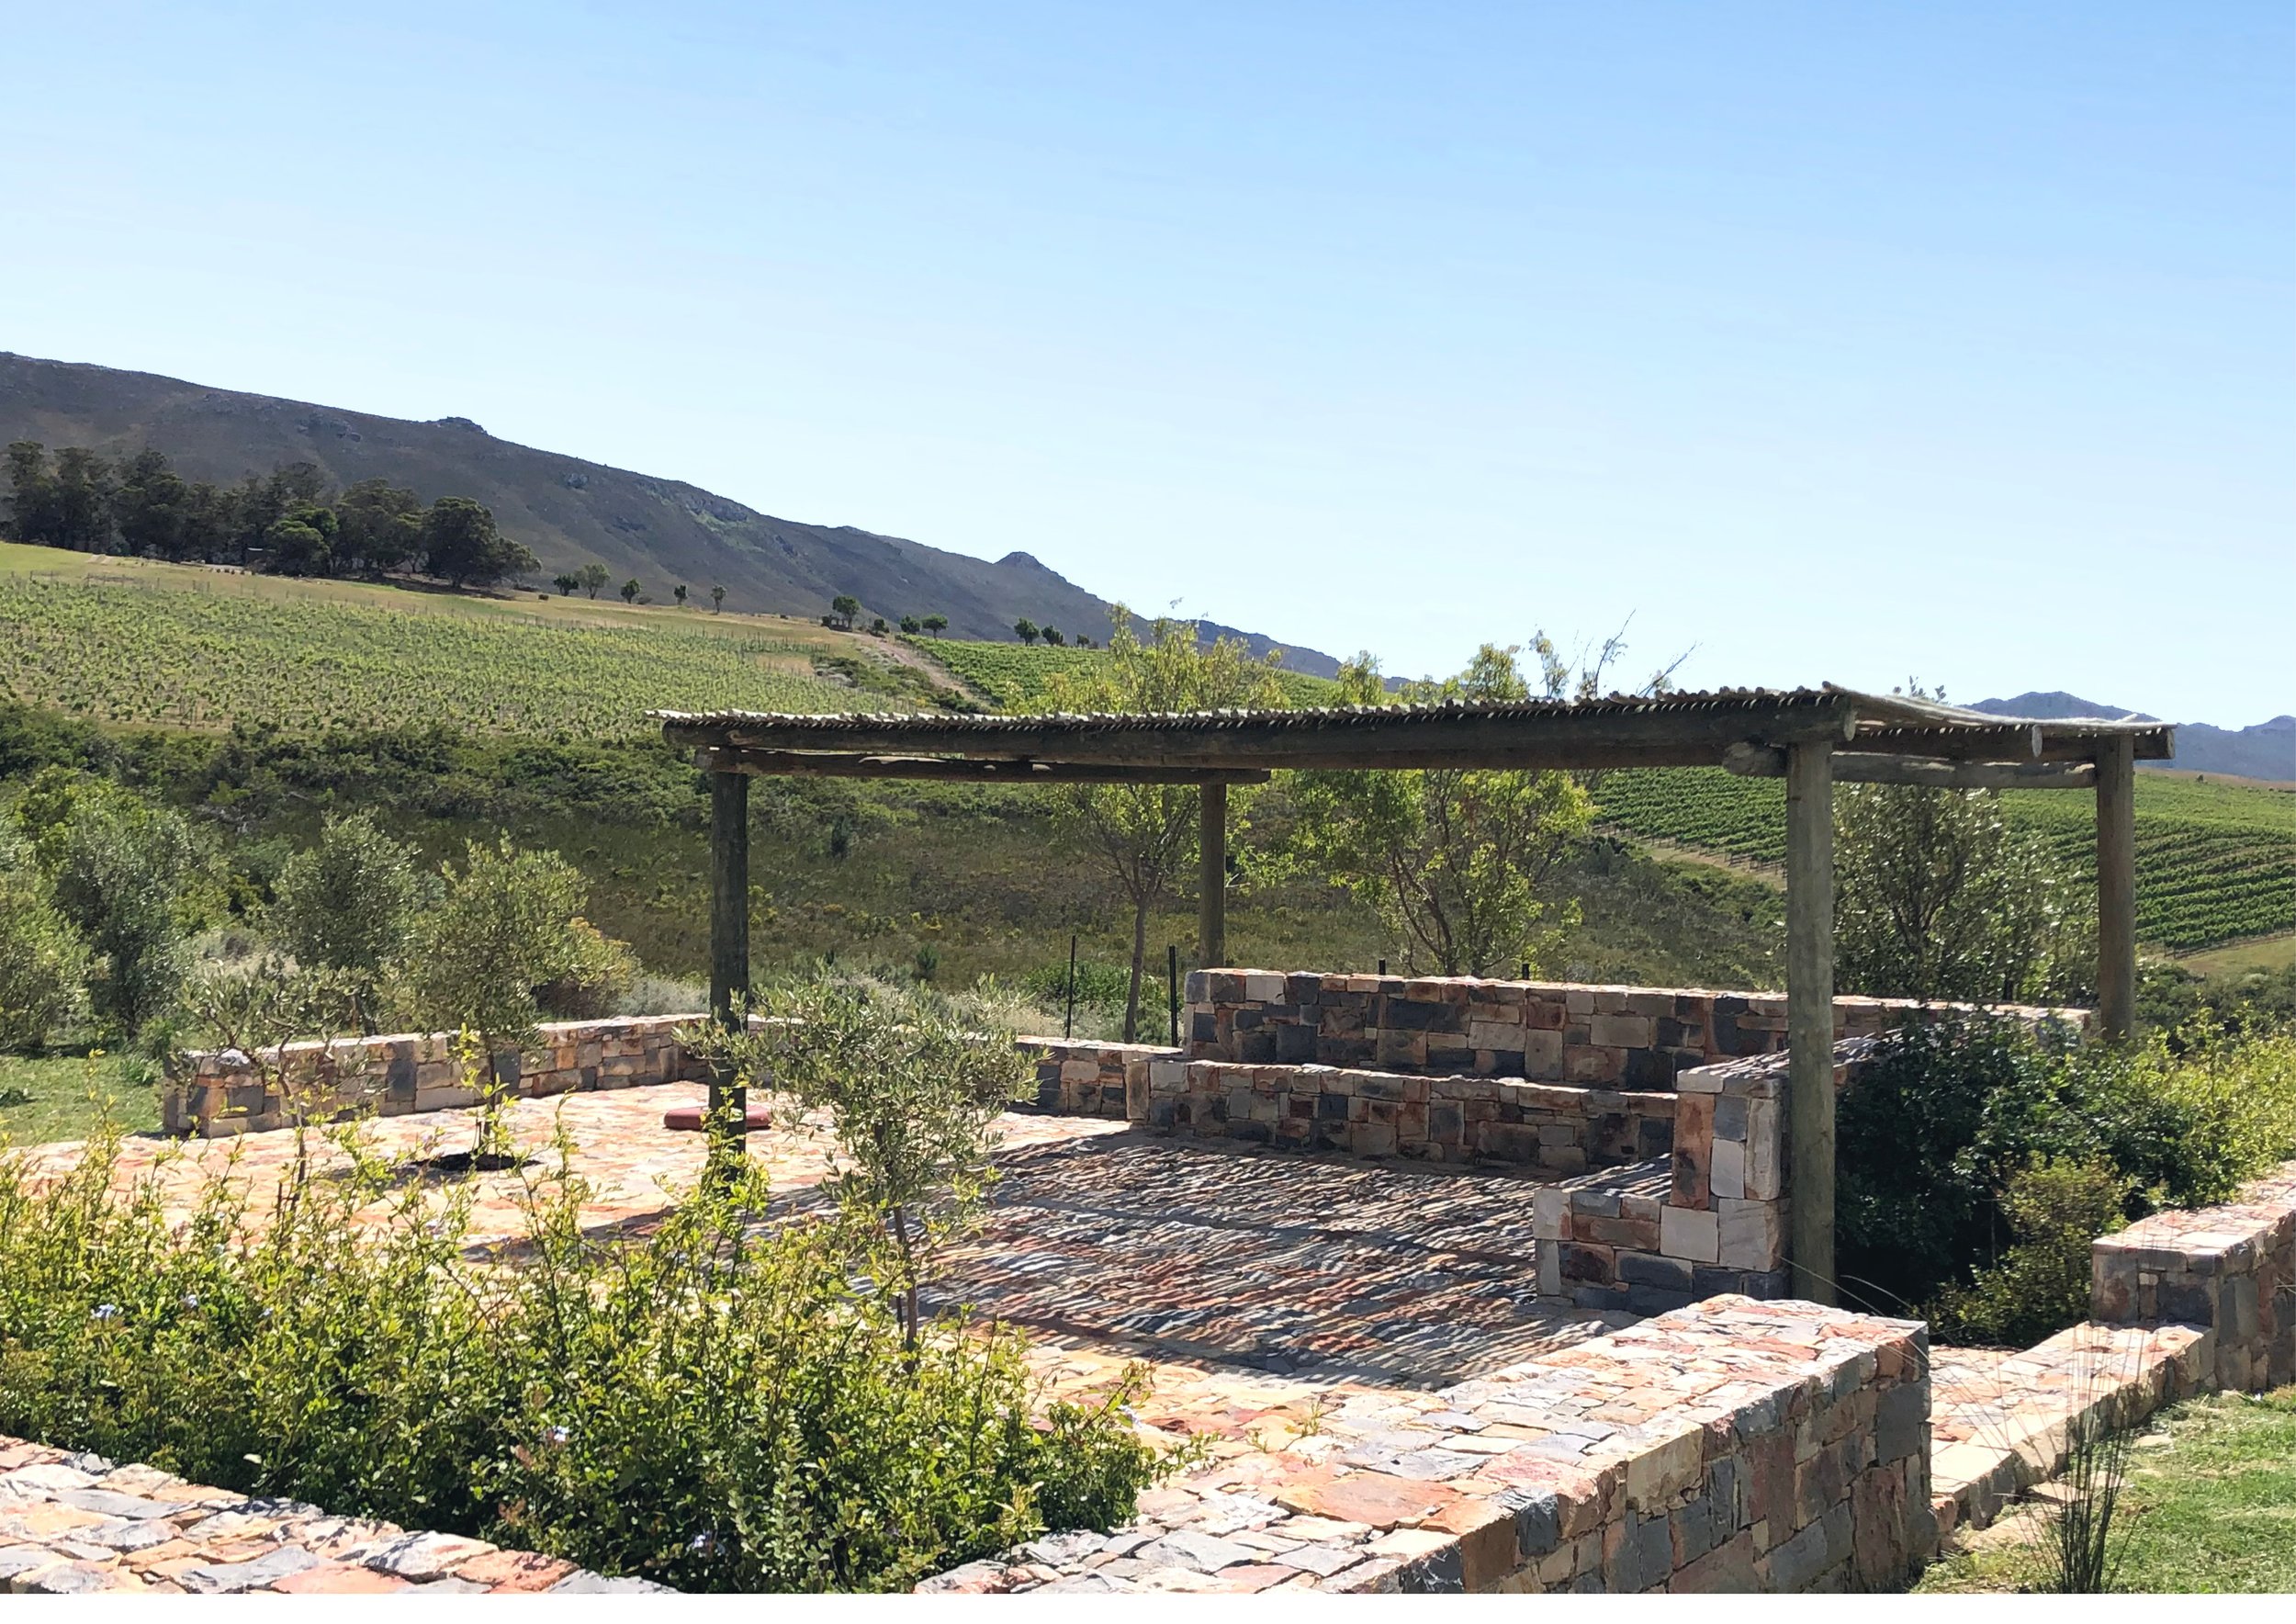  Jakob's Vineyard, a wine farm located in the Hemel en Aarde valley just outside of Hermanus, proved to be an intriguing project. It served as a landscape framework for an agricultural plot, prompting us to explore ways to seamlessly integrate this p